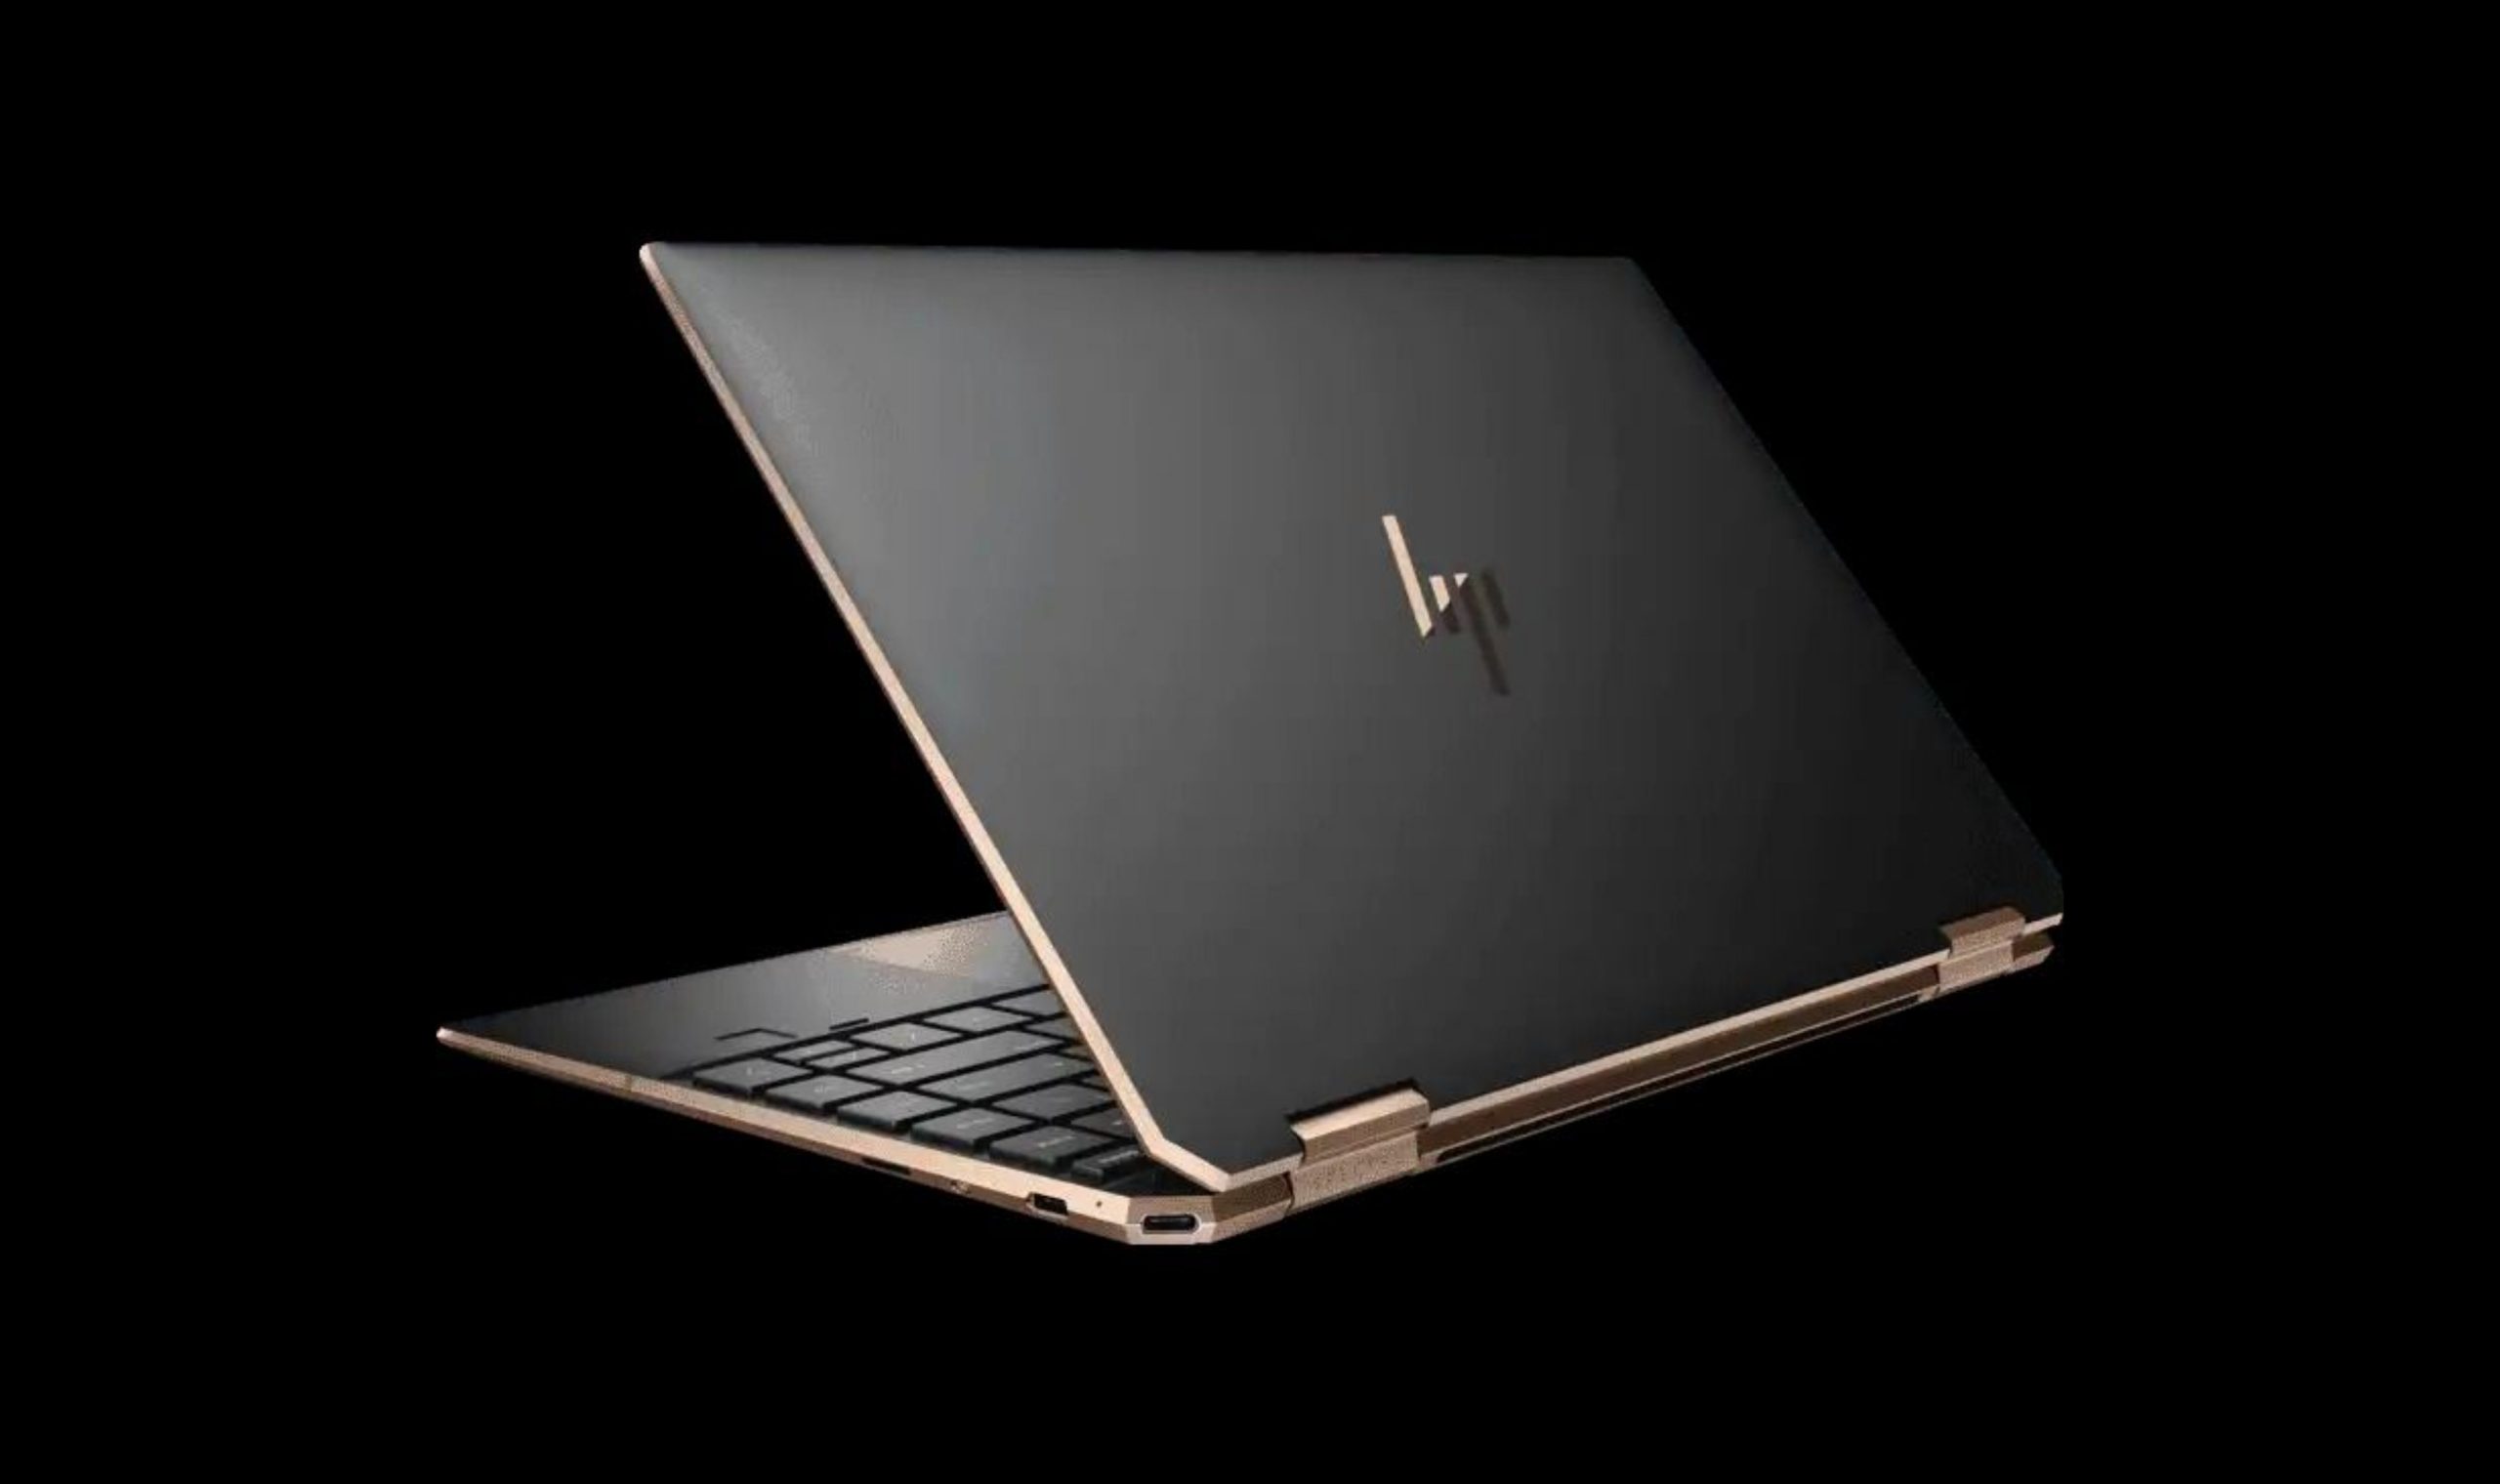 HP beats Lenovo to become the world’s largest notebook PC brand in Q3 2020